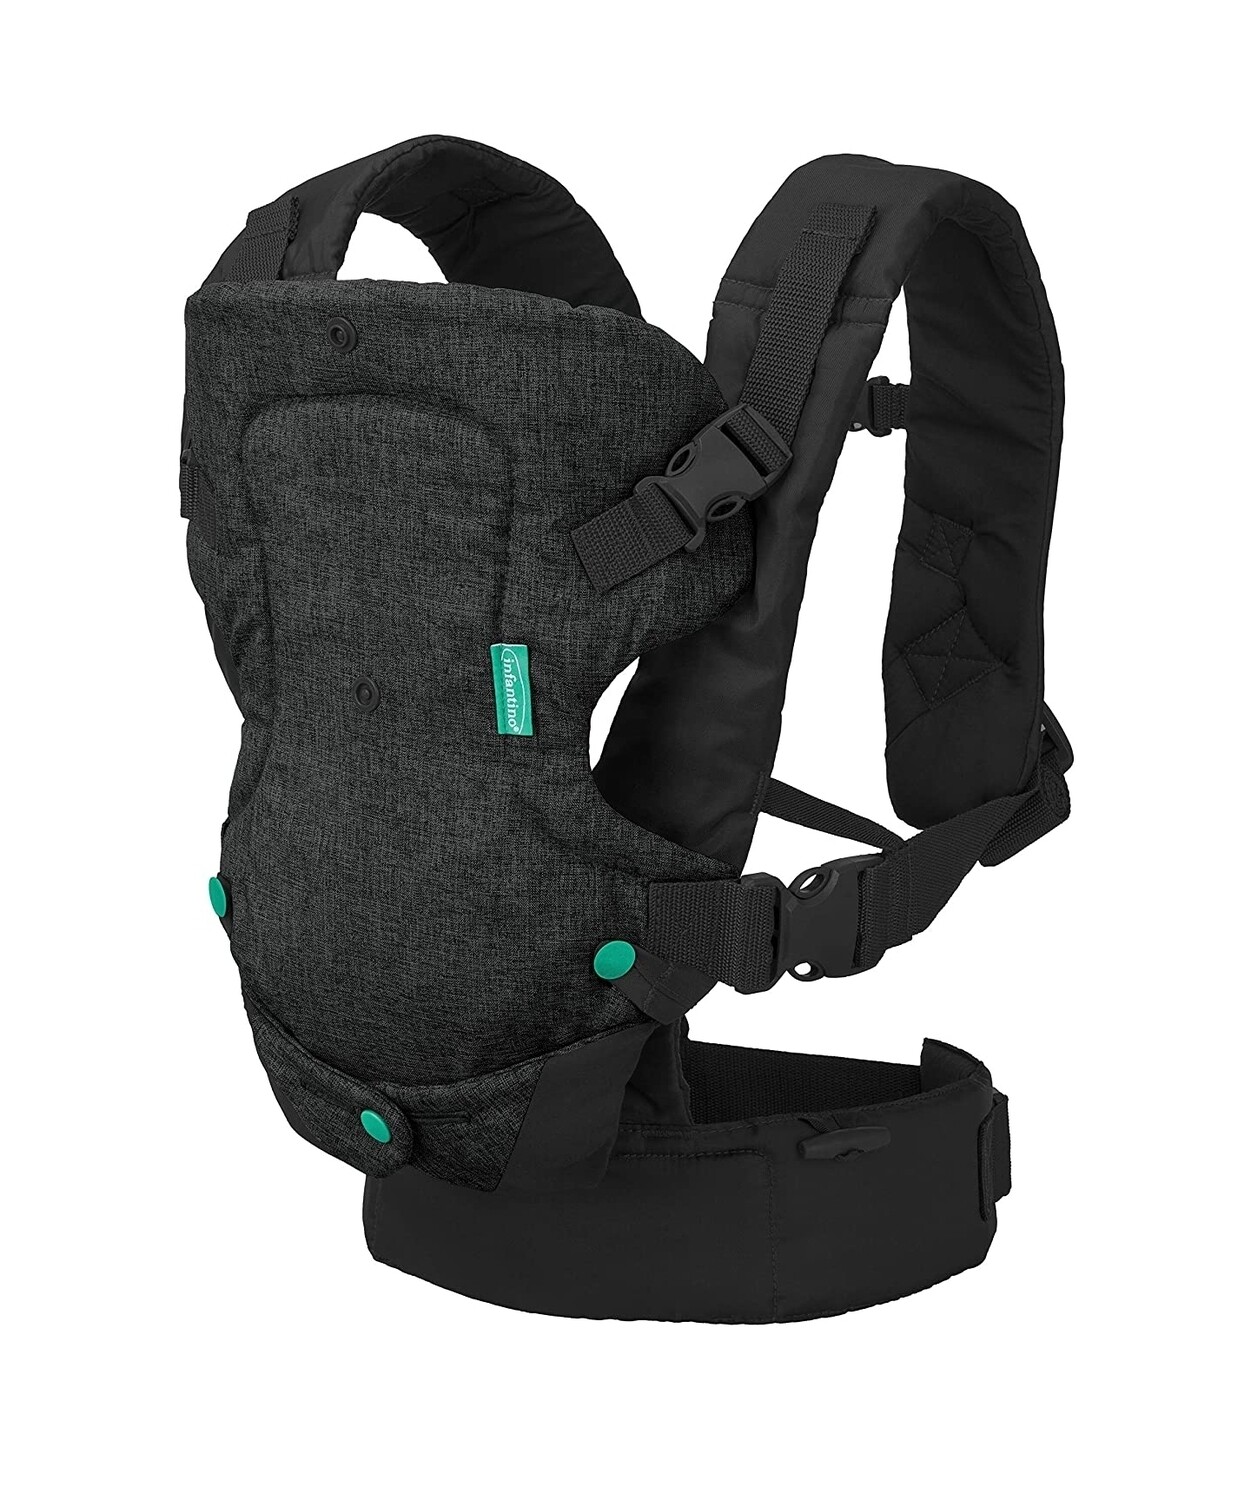 Infantino Flip 4-in-1 Carrier - Ergonomic, Convertible, face-in and face-Out, Front and Back Carry for Newborns and Older Babies 8-32 lbs